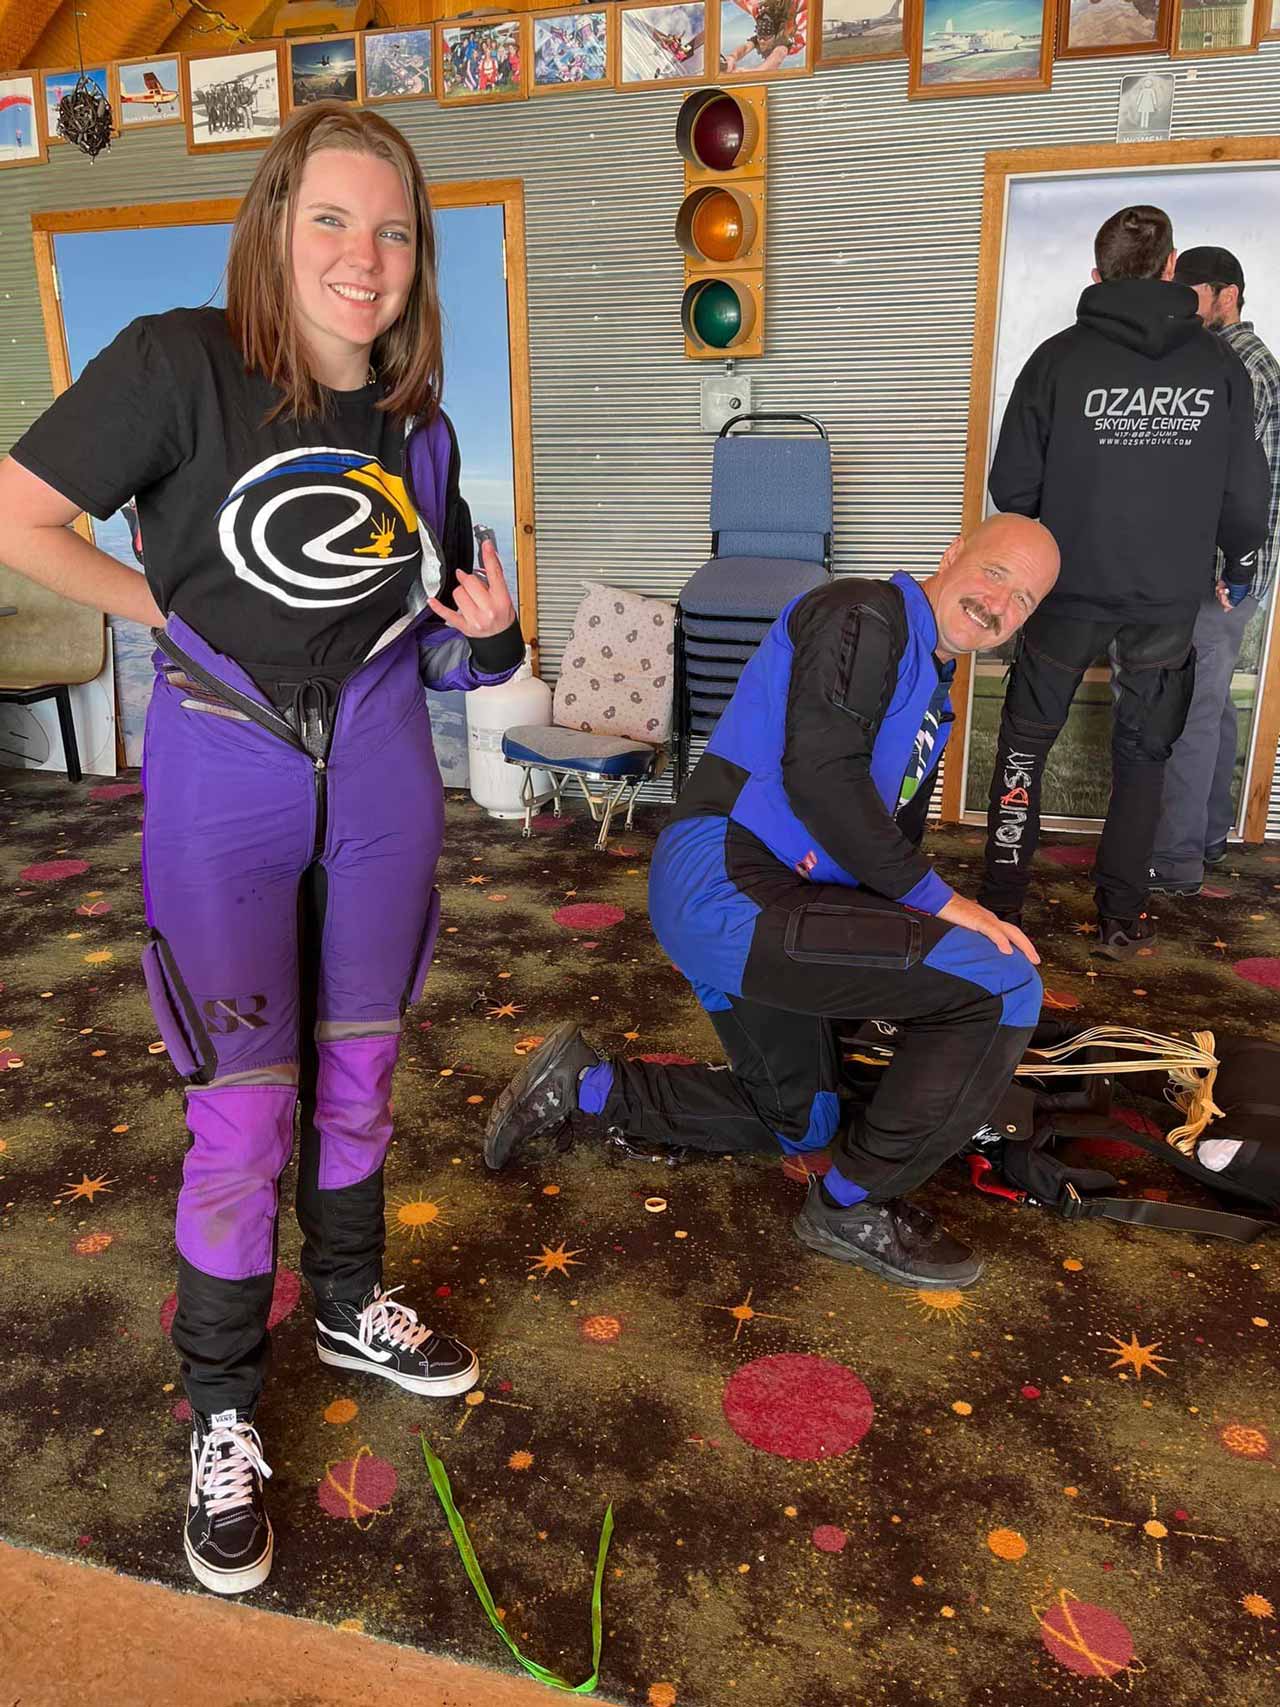 young woman in purple jumpsuit and OZARKS Skydive Center shirt gets ready to skydive